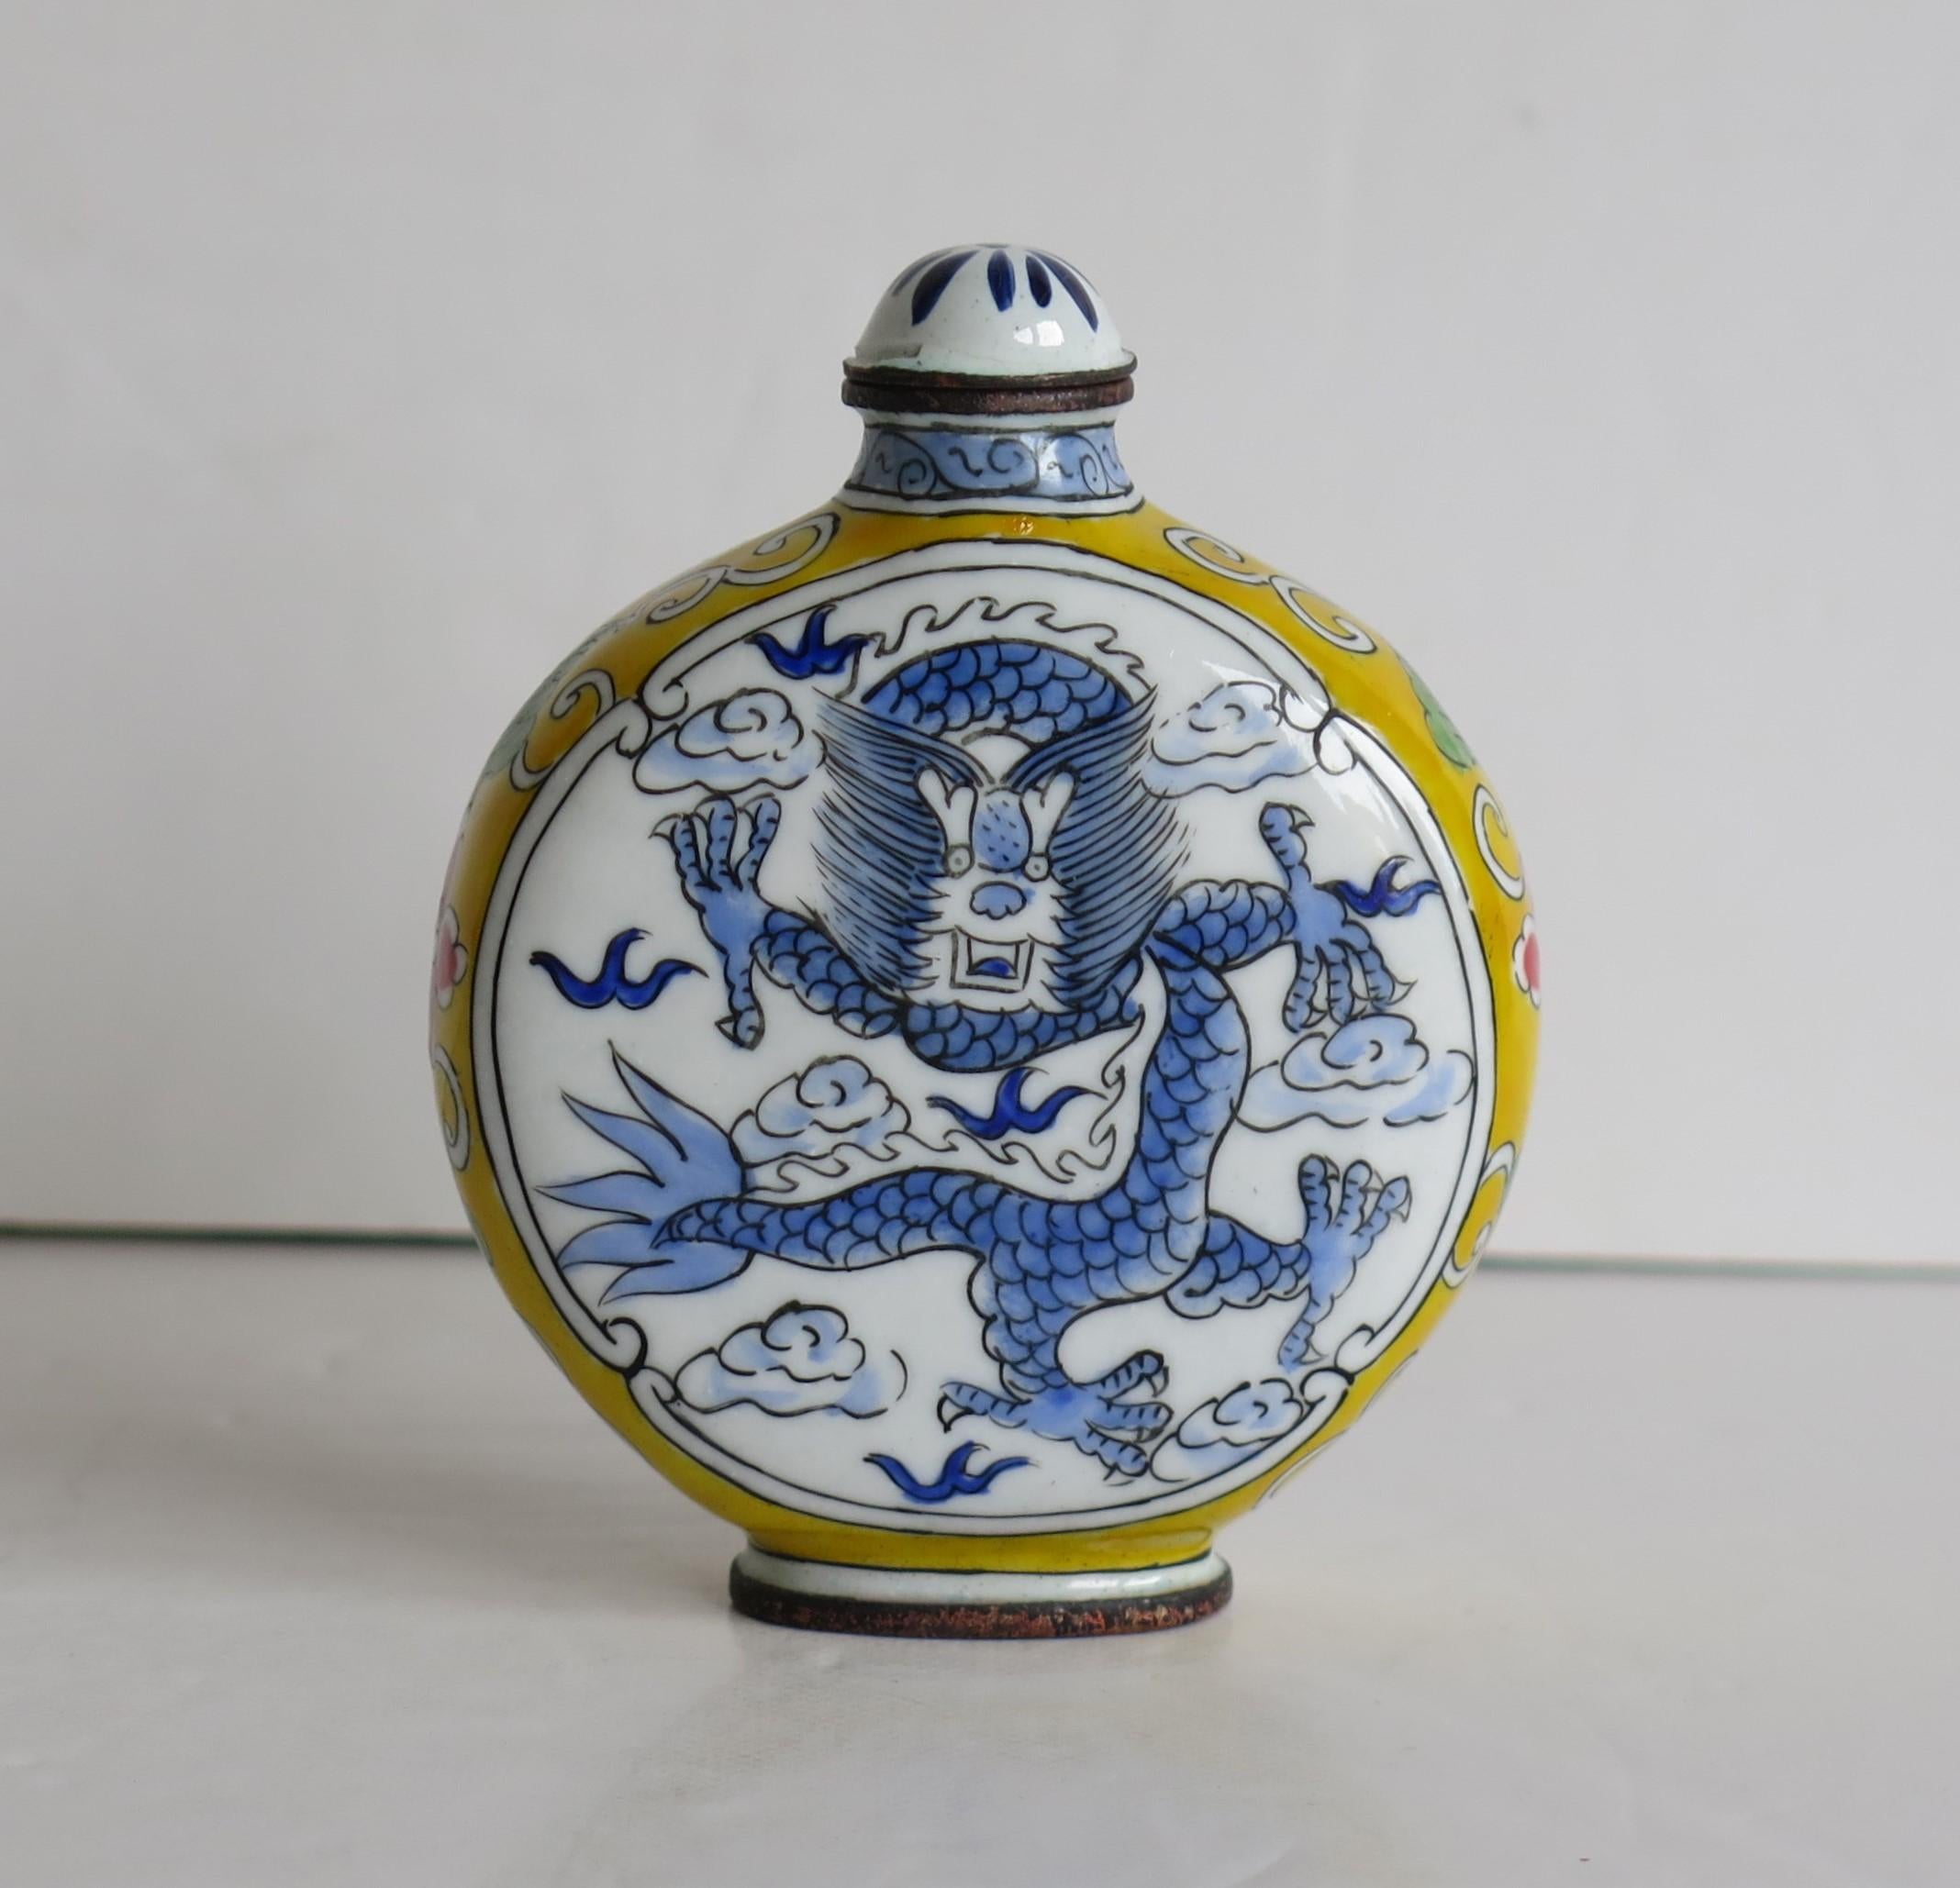 This is a Chinese enamelled snuff bottle, with a hand painted dragon on either side, with coloured side borders and a four character mark to the base, which we date to the 1940s.

The circular body of this bottle is made of copper or bronze. There